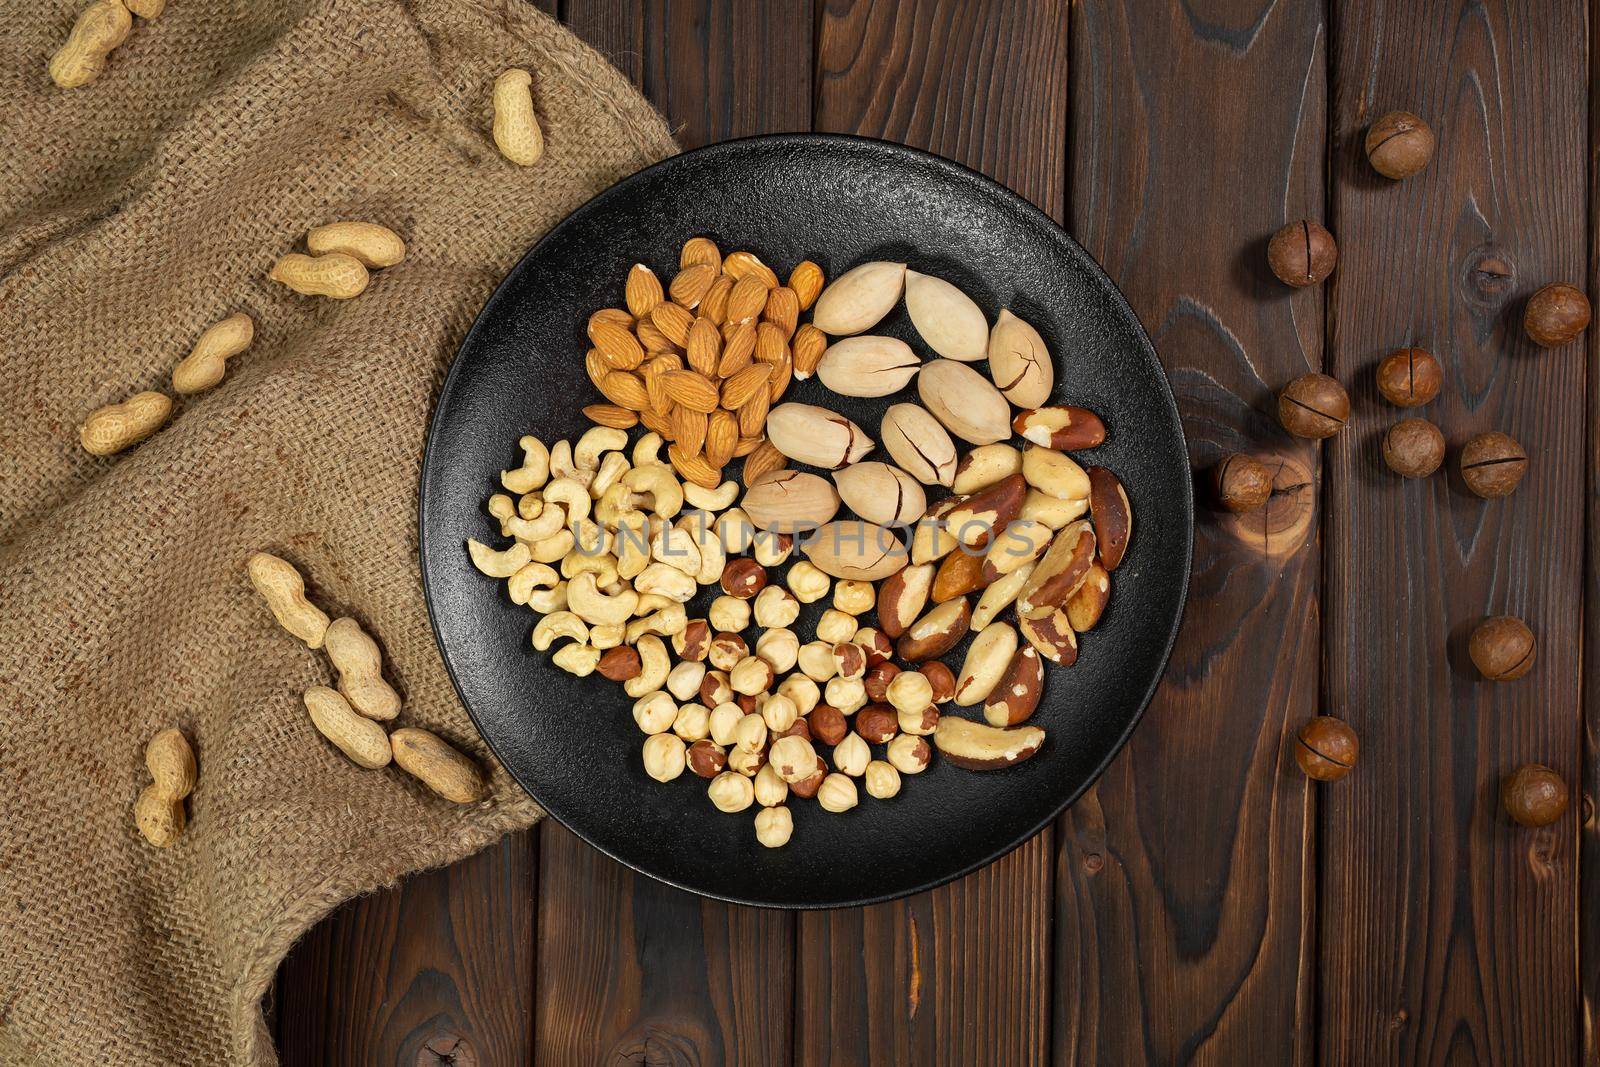 Mixture of nuts in a black plate on a brown wooden background by StudioPeace